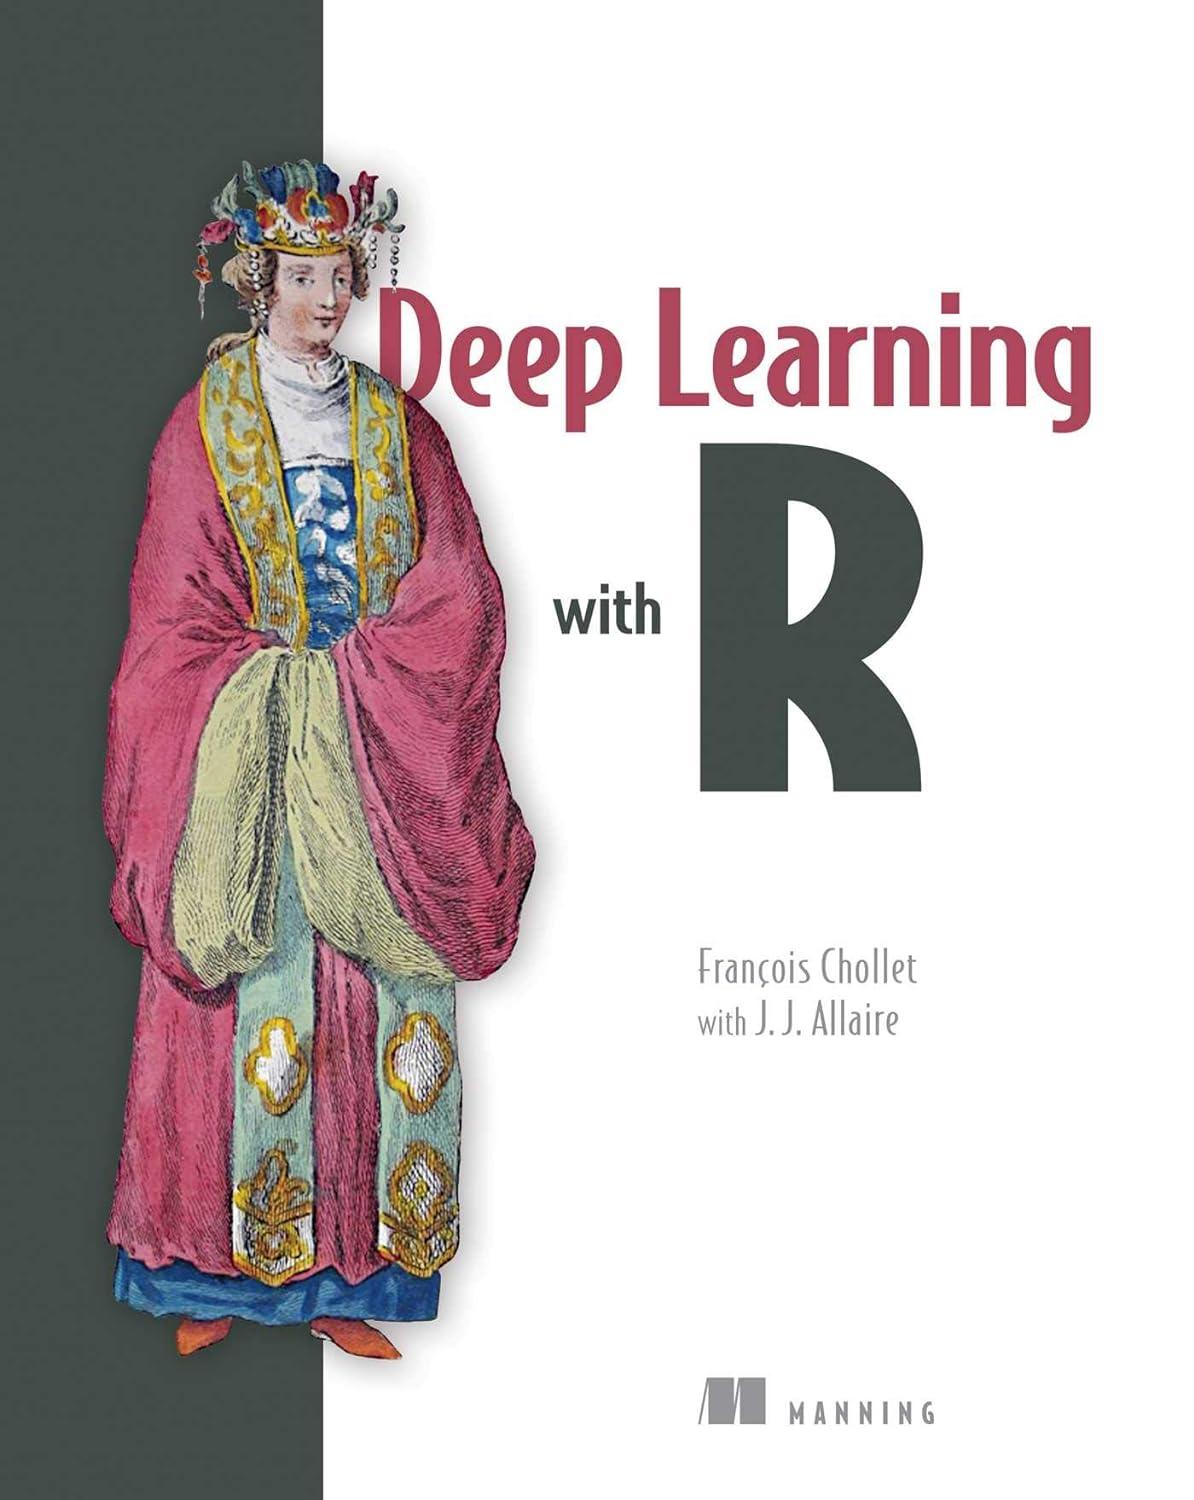 deep learning with r 1st edition francois chollet , j.j. allaire 161729554x, 978-1617295546